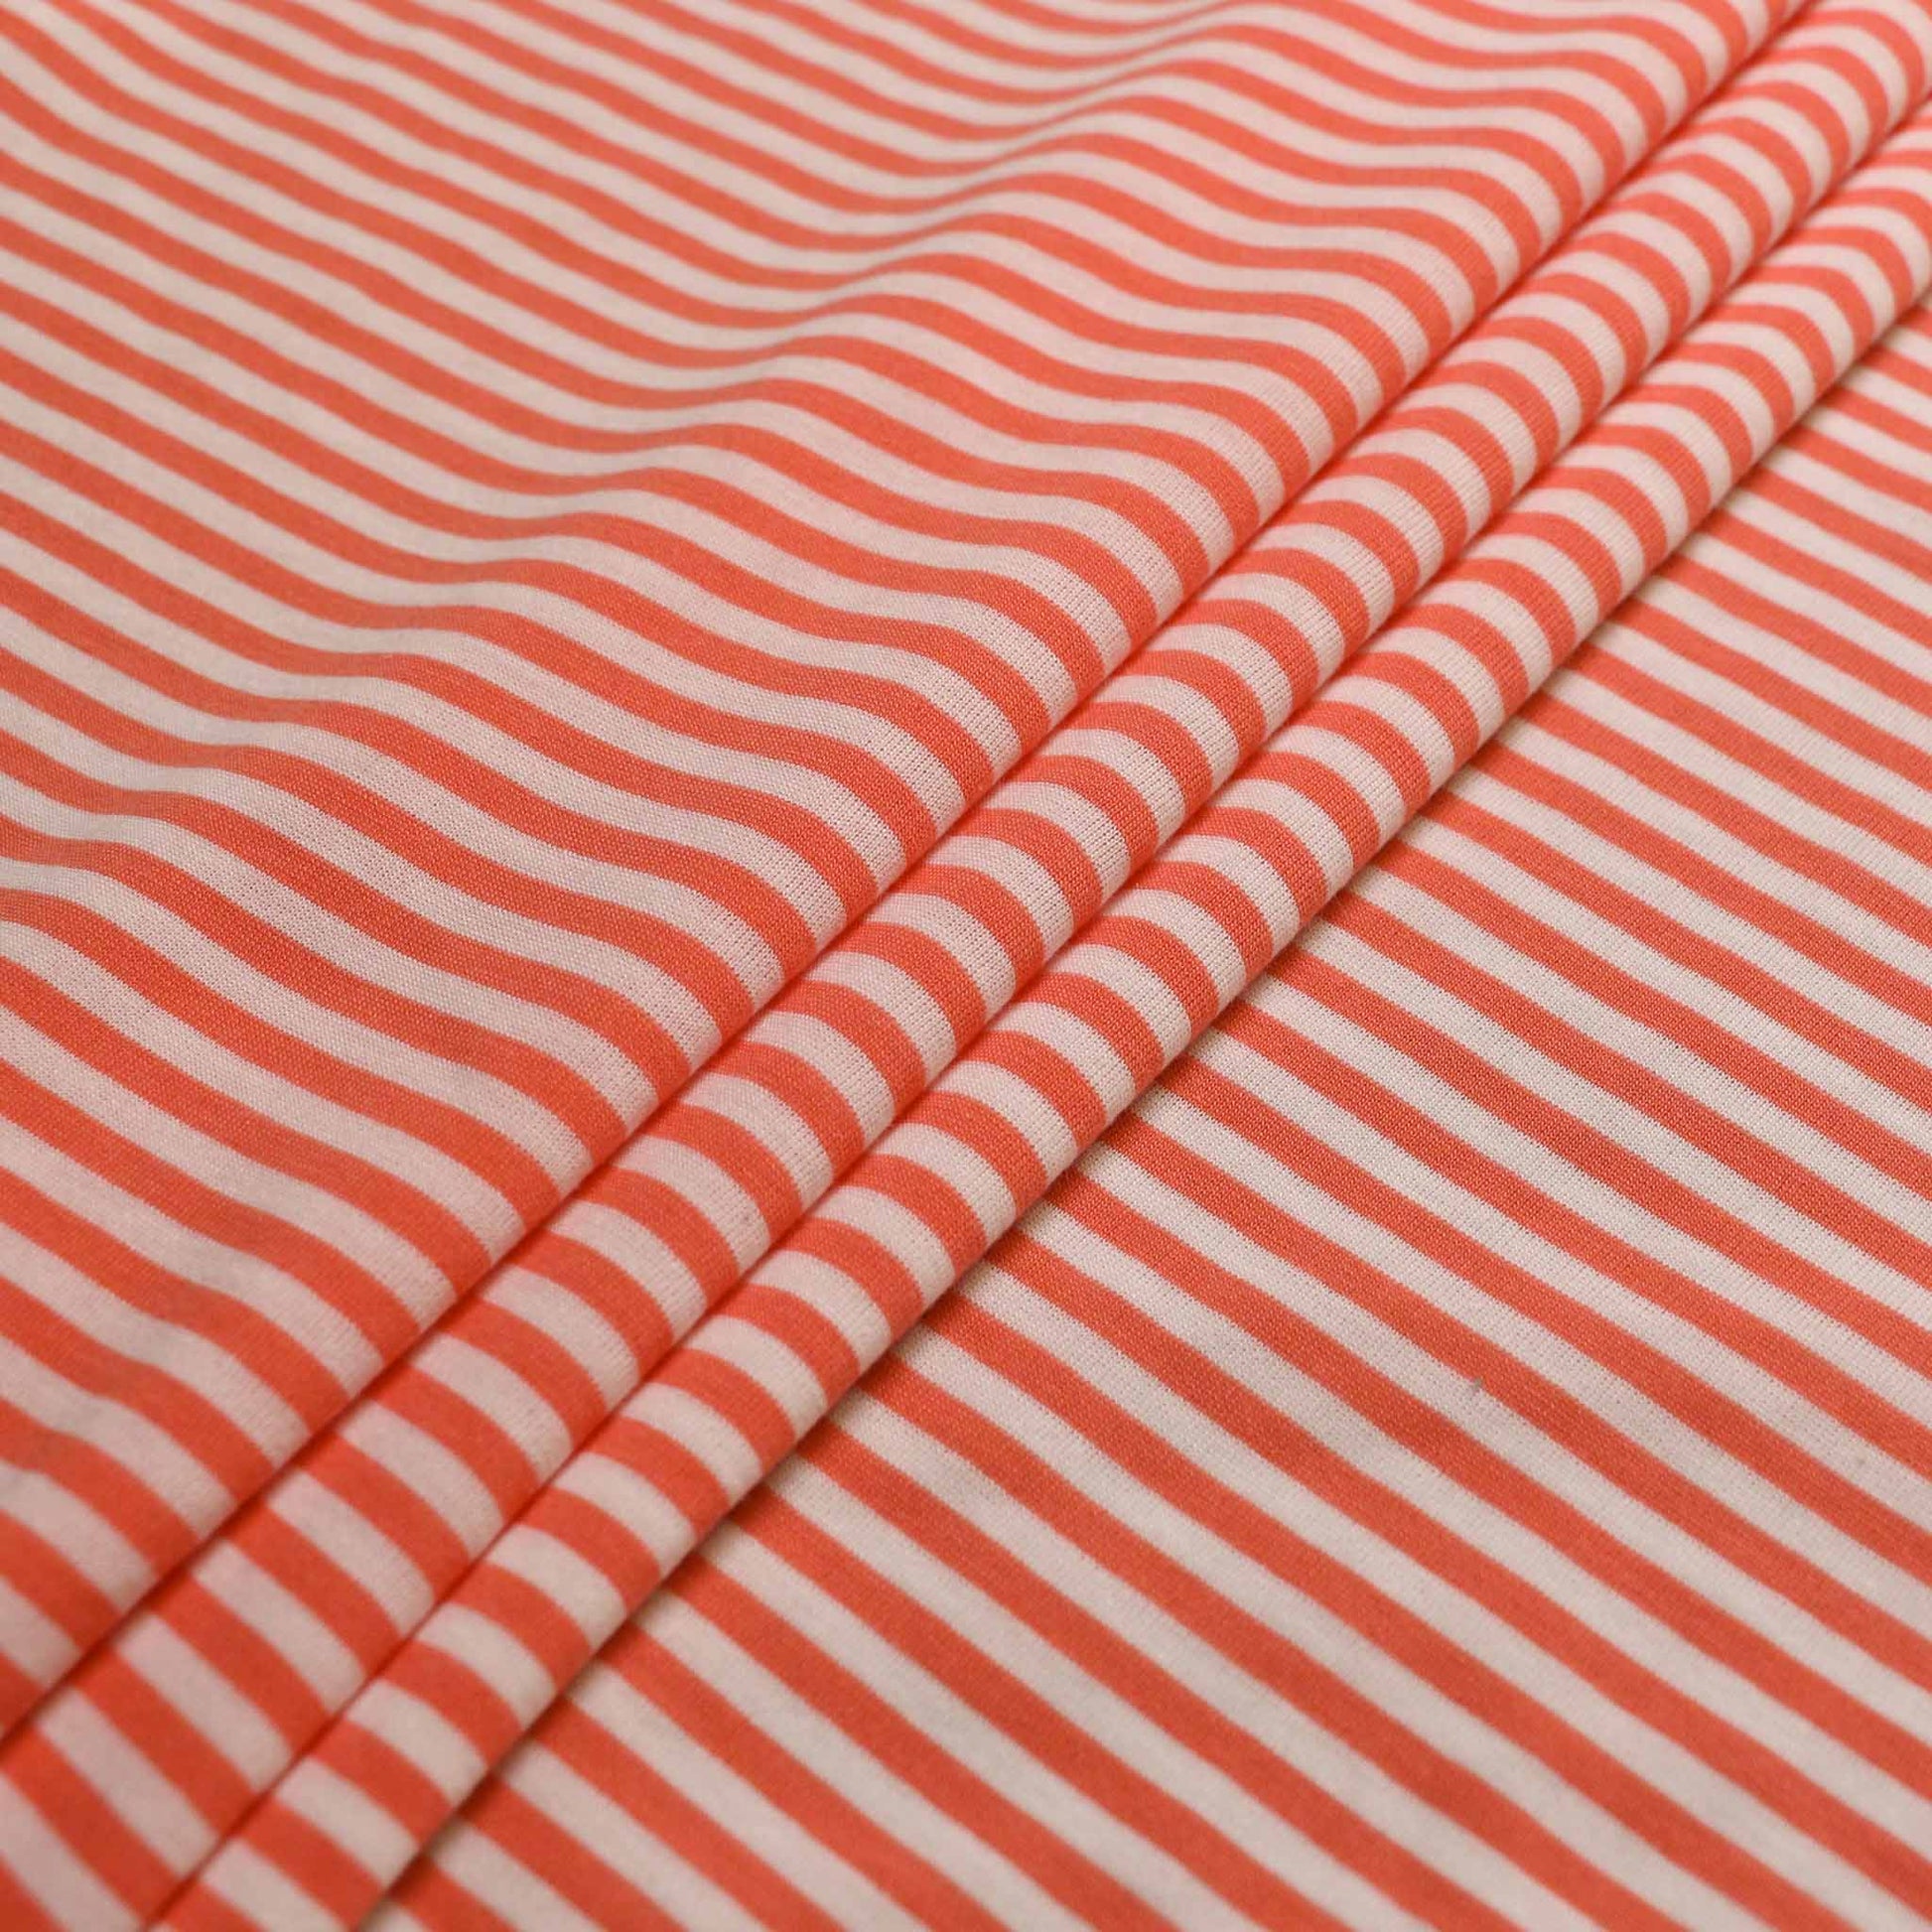 cloth control fabric for dressmaking with coral orange stripes